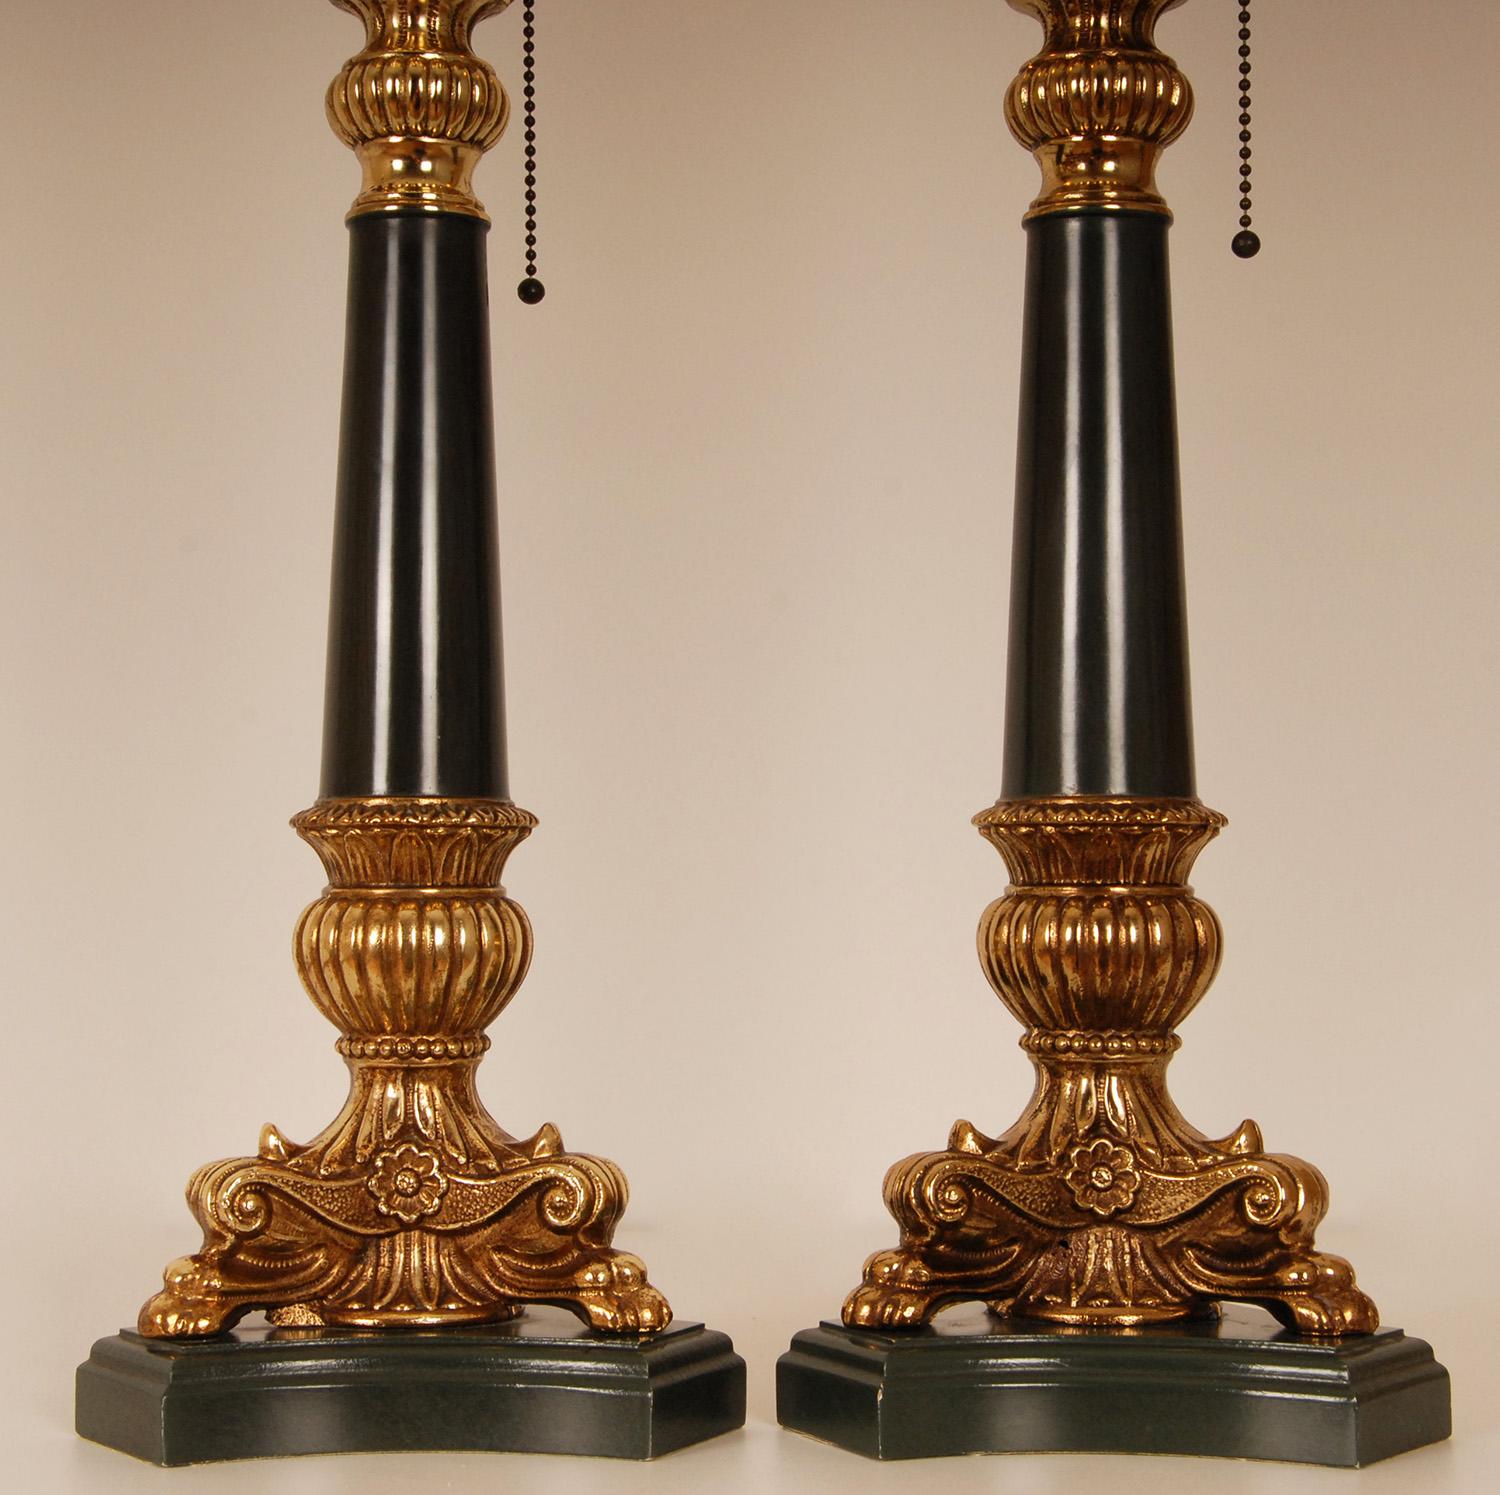 Bronze French Bouillotte Lamps Napoleonic Empire Green Gold Gilded Vintage Table Lamps For Sale